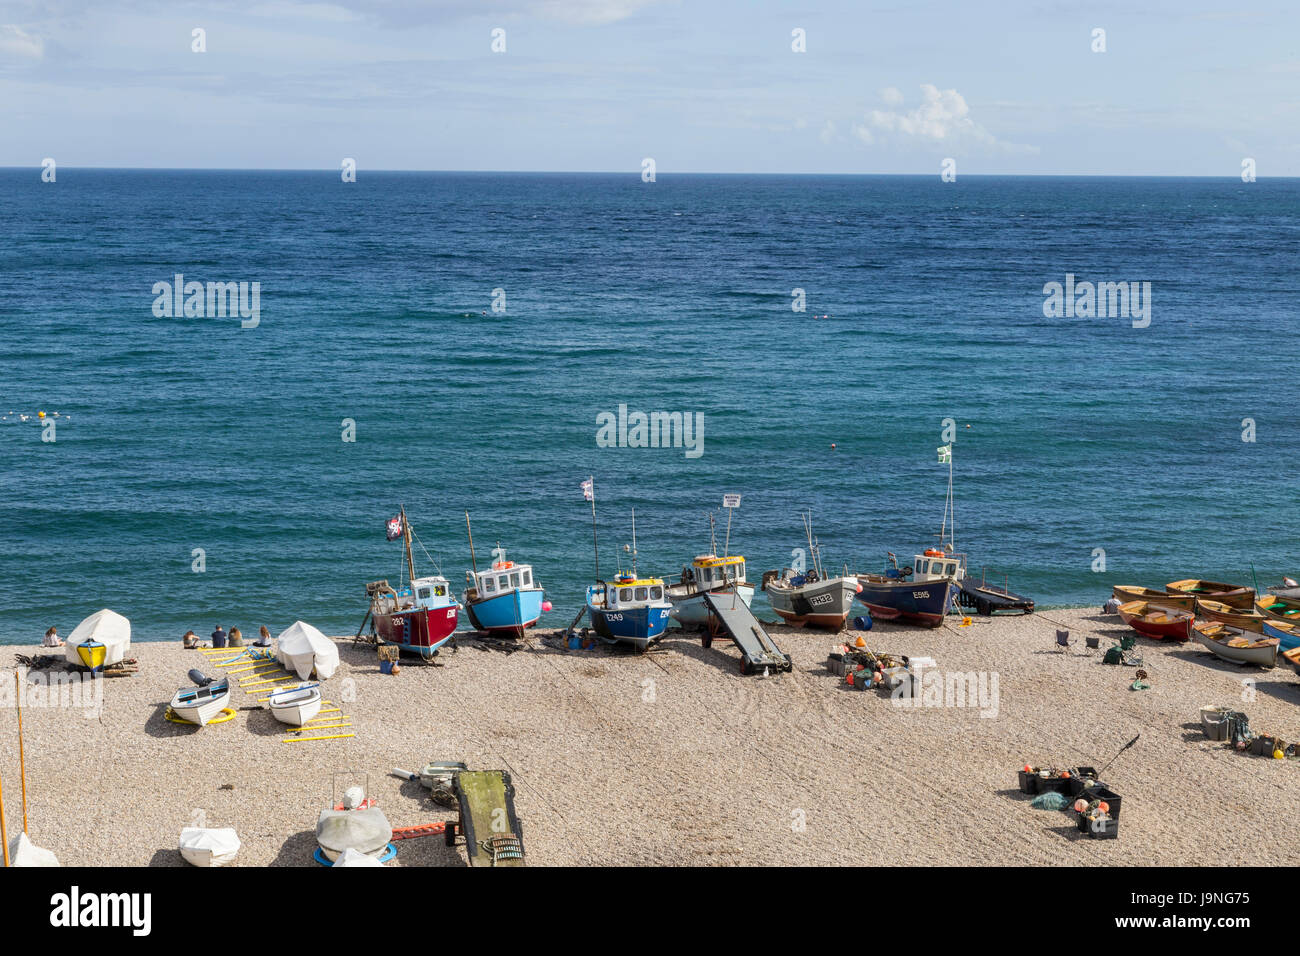 Fishing boats on the beach at Beer, Devon, a pretty fishing village on the jurassic coast. Stock Photo